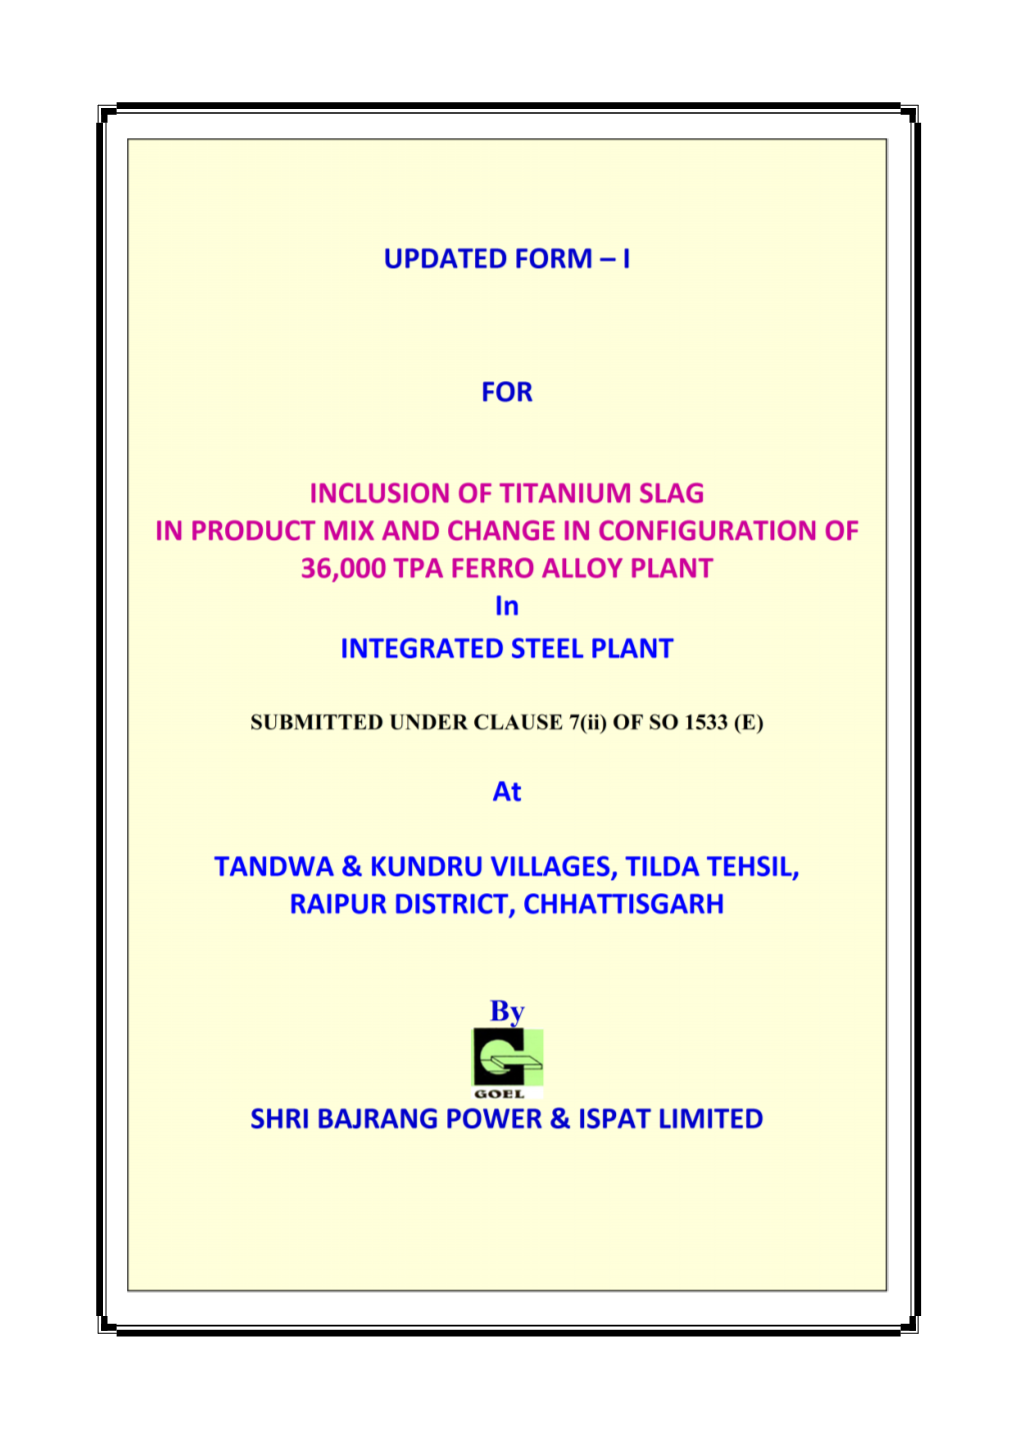 Updated Form – I for Inclusion of Titanium Slag in Product